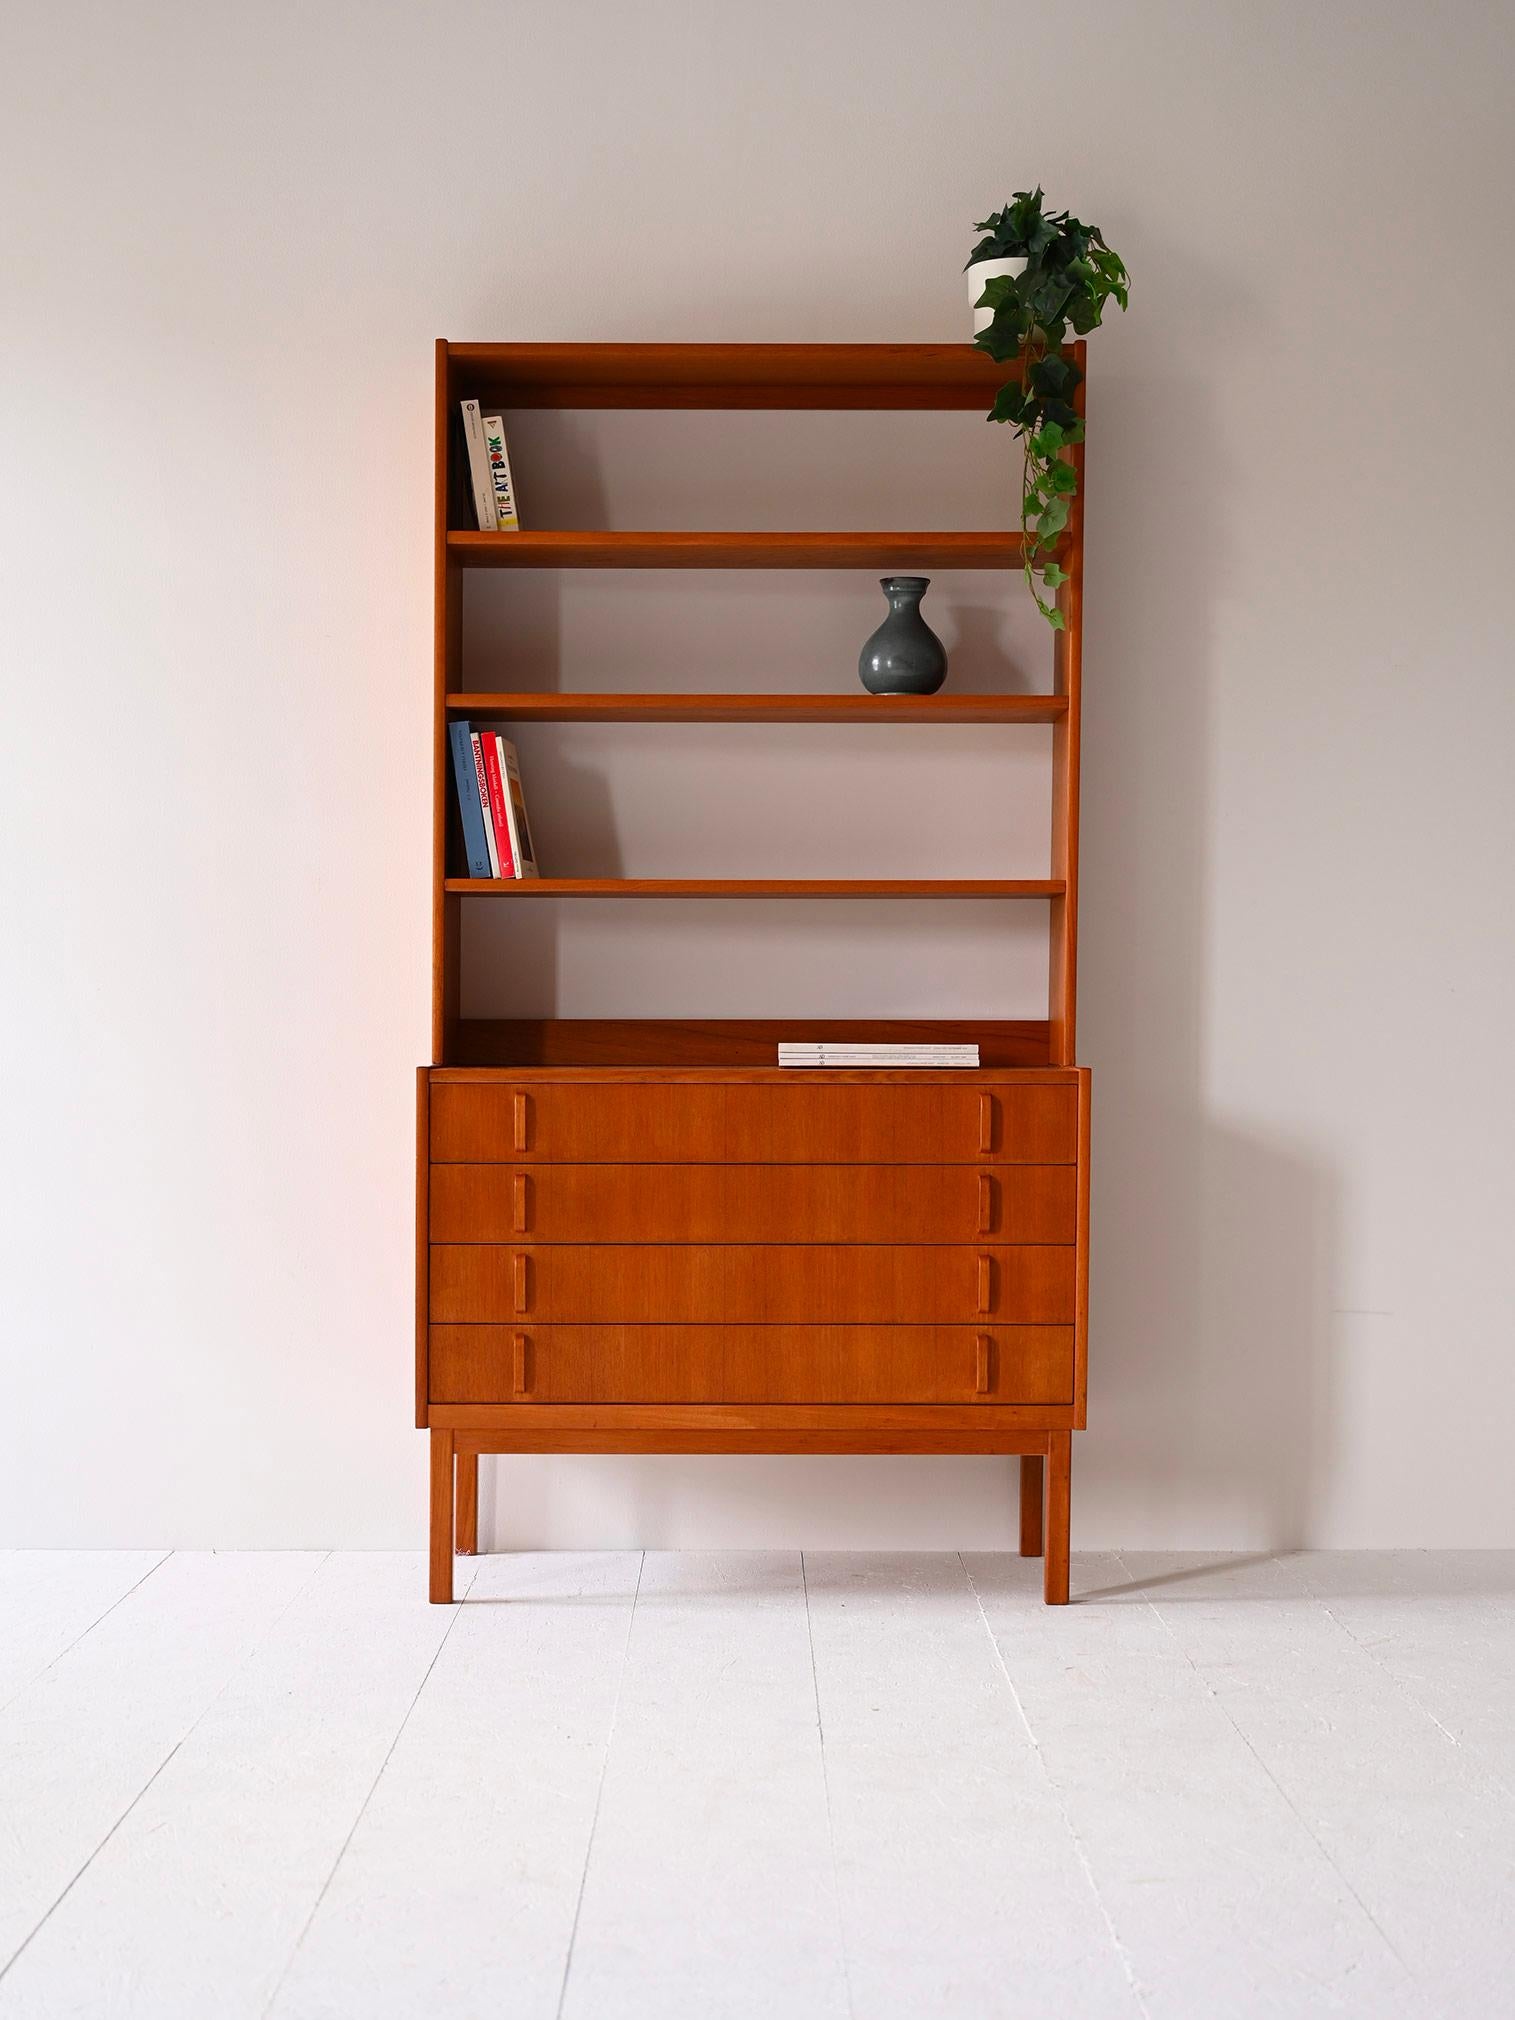 1960s teak cabinet from the Bodafors company.

A Scandinavian piece of furniture with a simple and functional design. Consisting in the lower part of a chest of drawers with 4 drawers with a curved wooden handle, and in the upper part there are 4